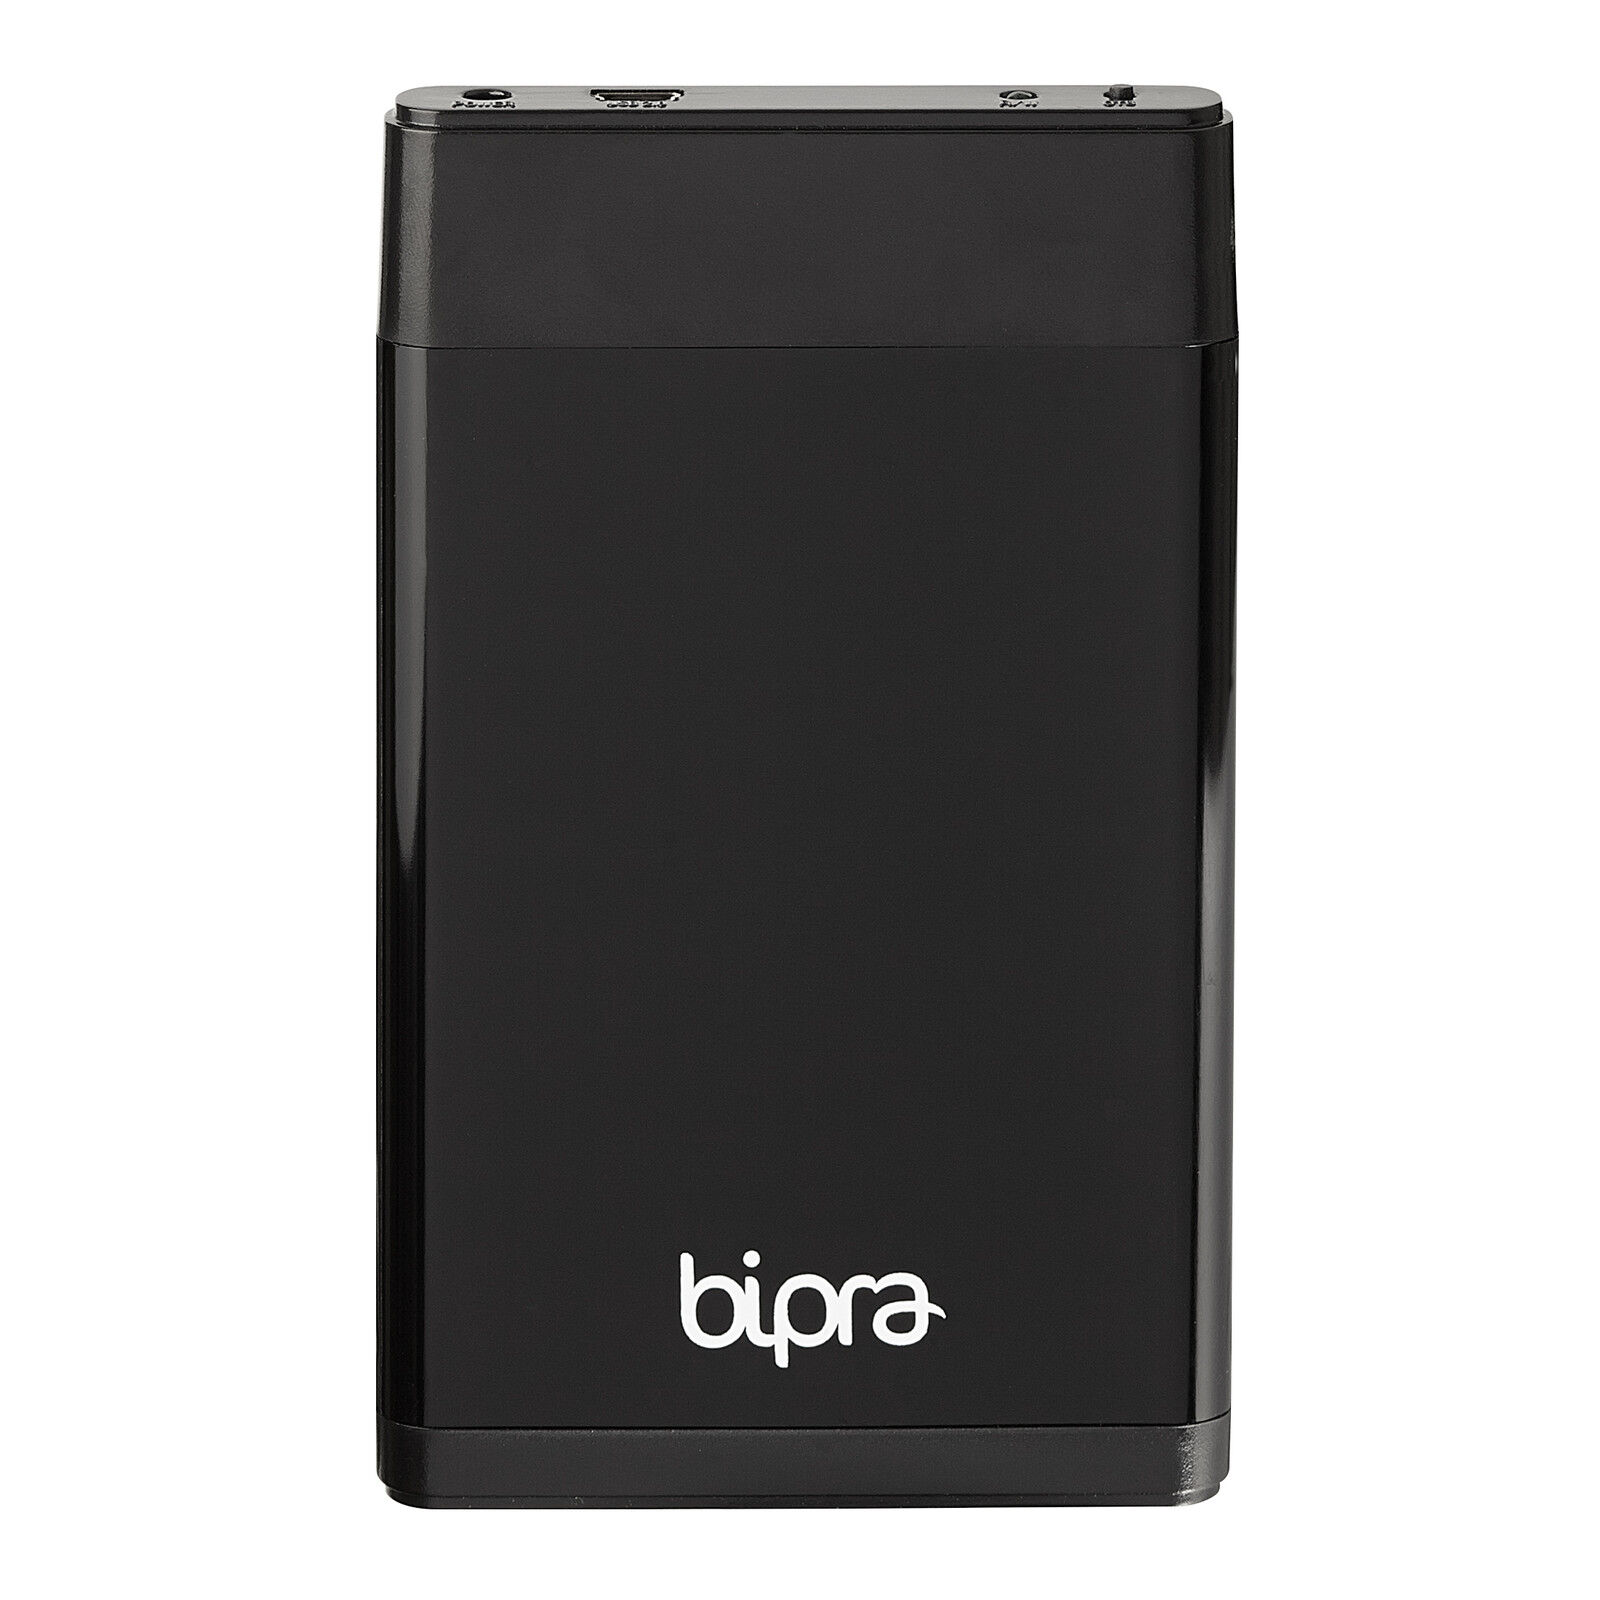 Bipra 2TB External Portable Hard Drive with One Touch Back Up Software - Black